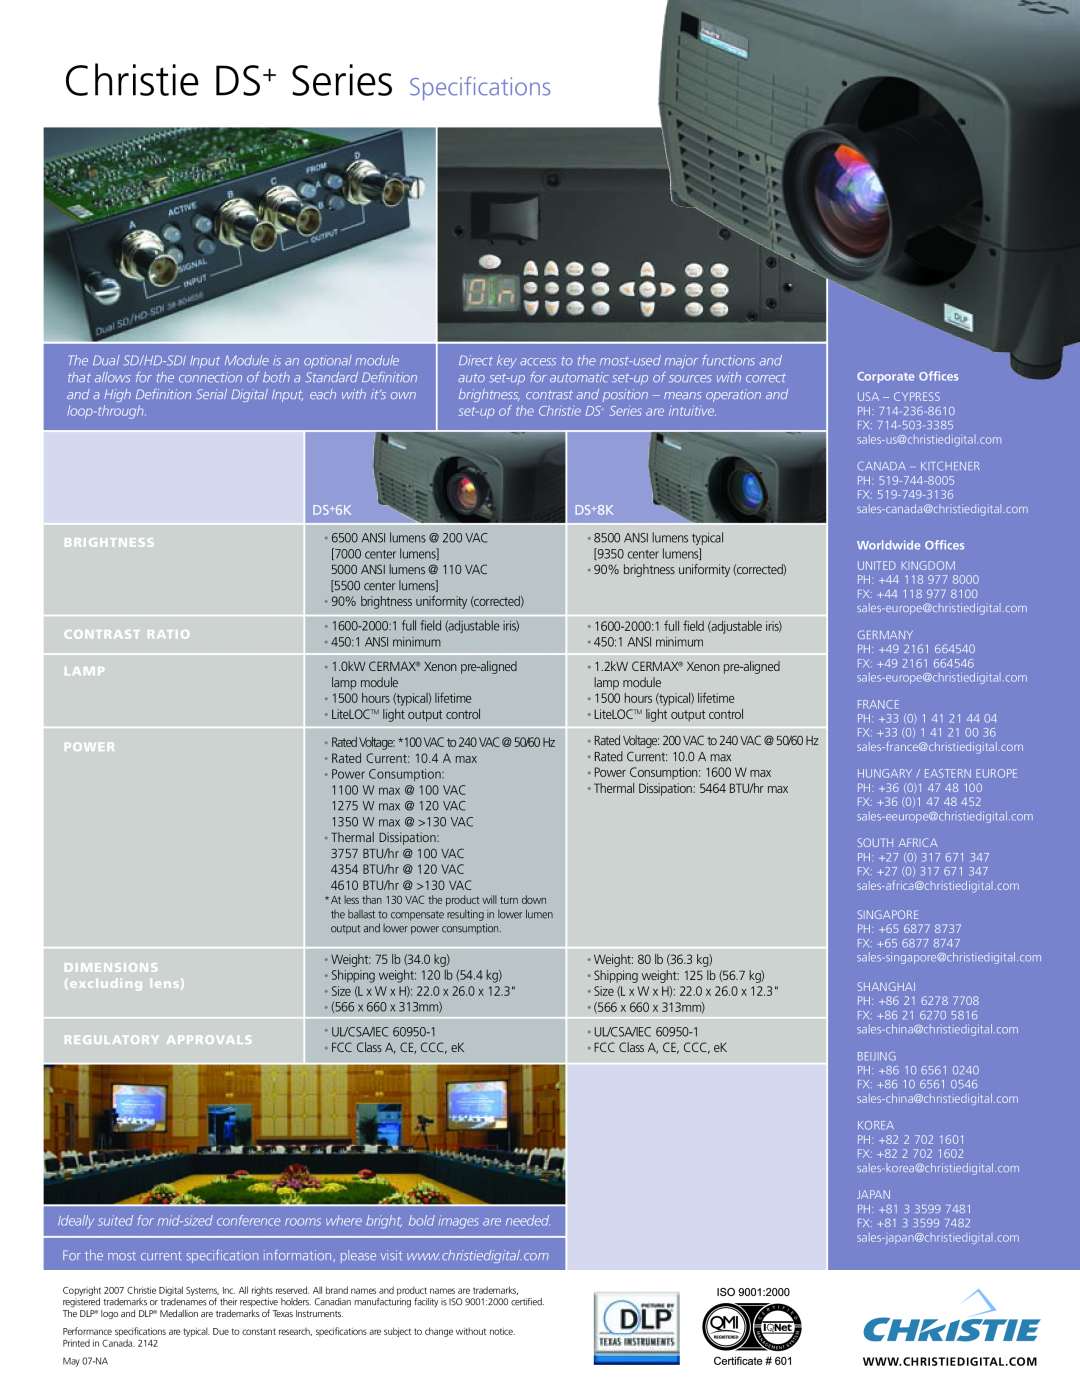 Christie Digital Systems Christie DS+ Series Specifications, The Dual SD/HD-SDI Input Module is an optional module 